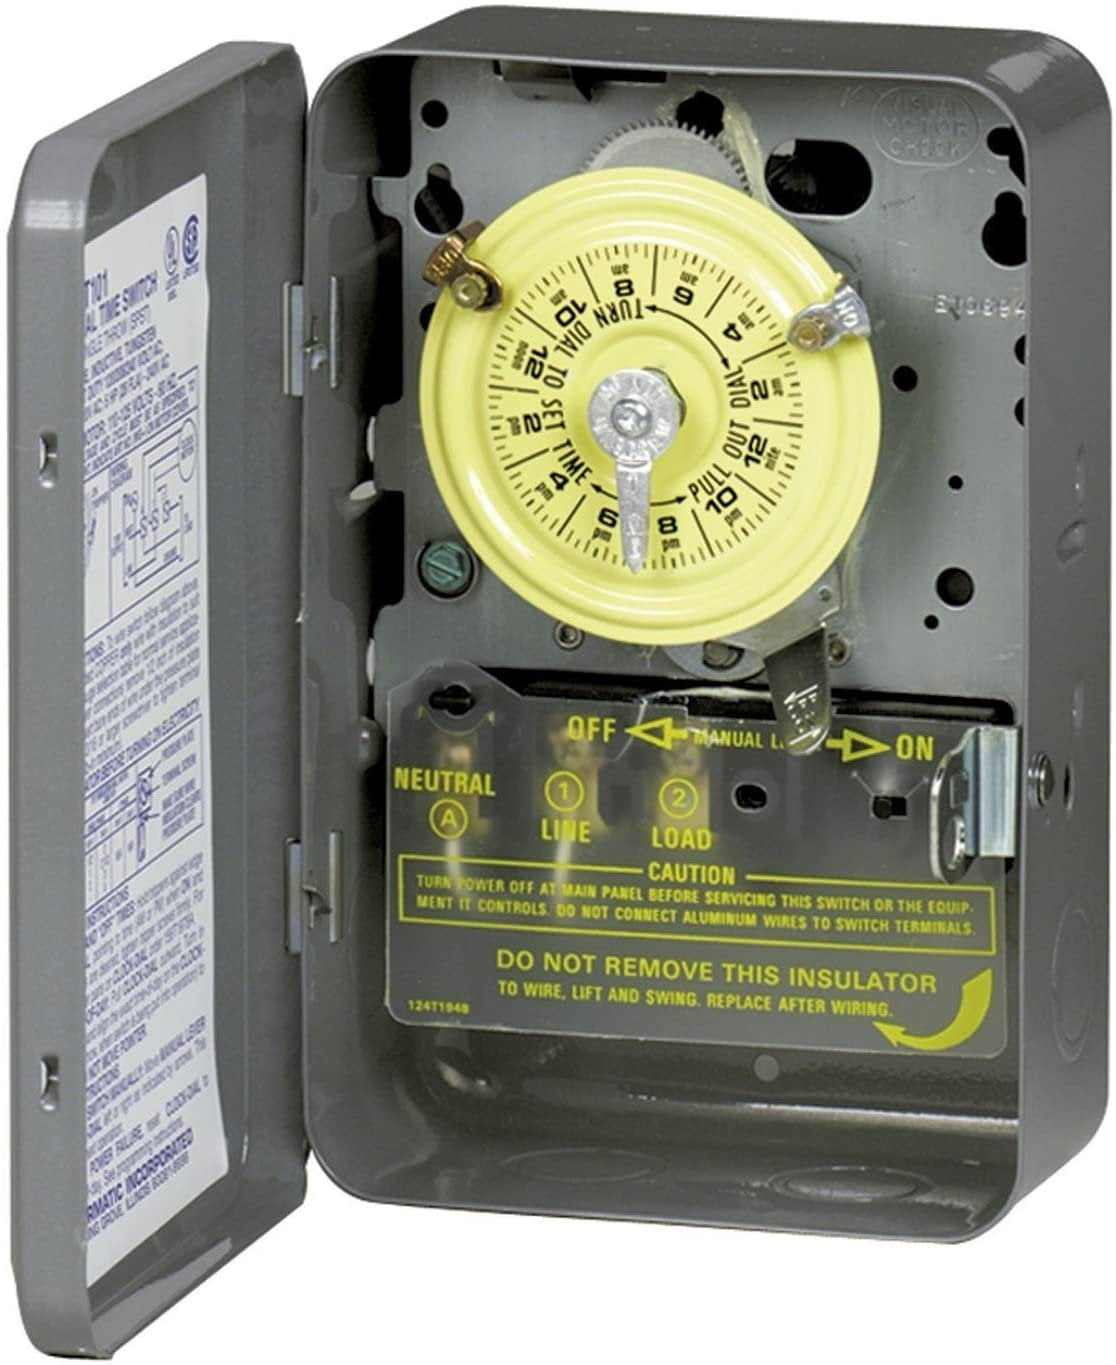 Electromechanical Timer 24-hour Multioperation T1905 Intermatic for sale online 